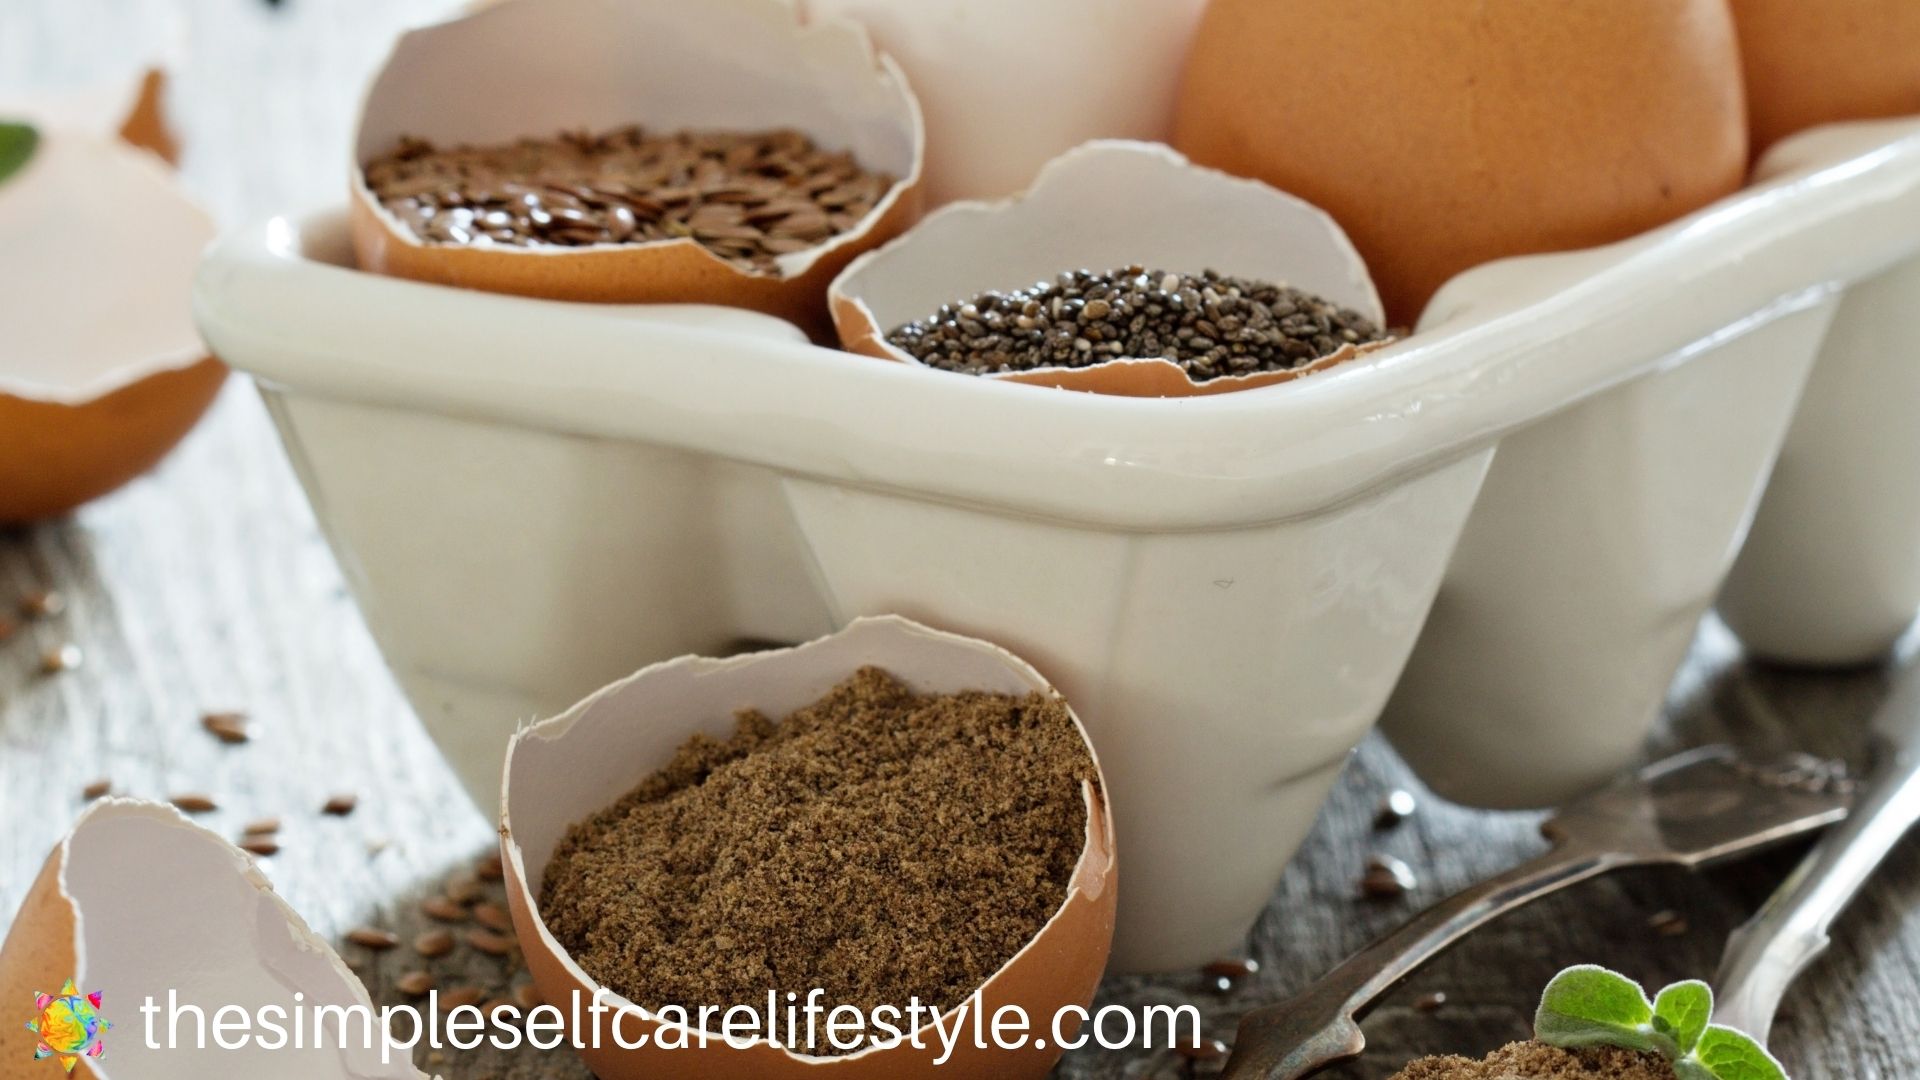 Flax seed as egg replacement